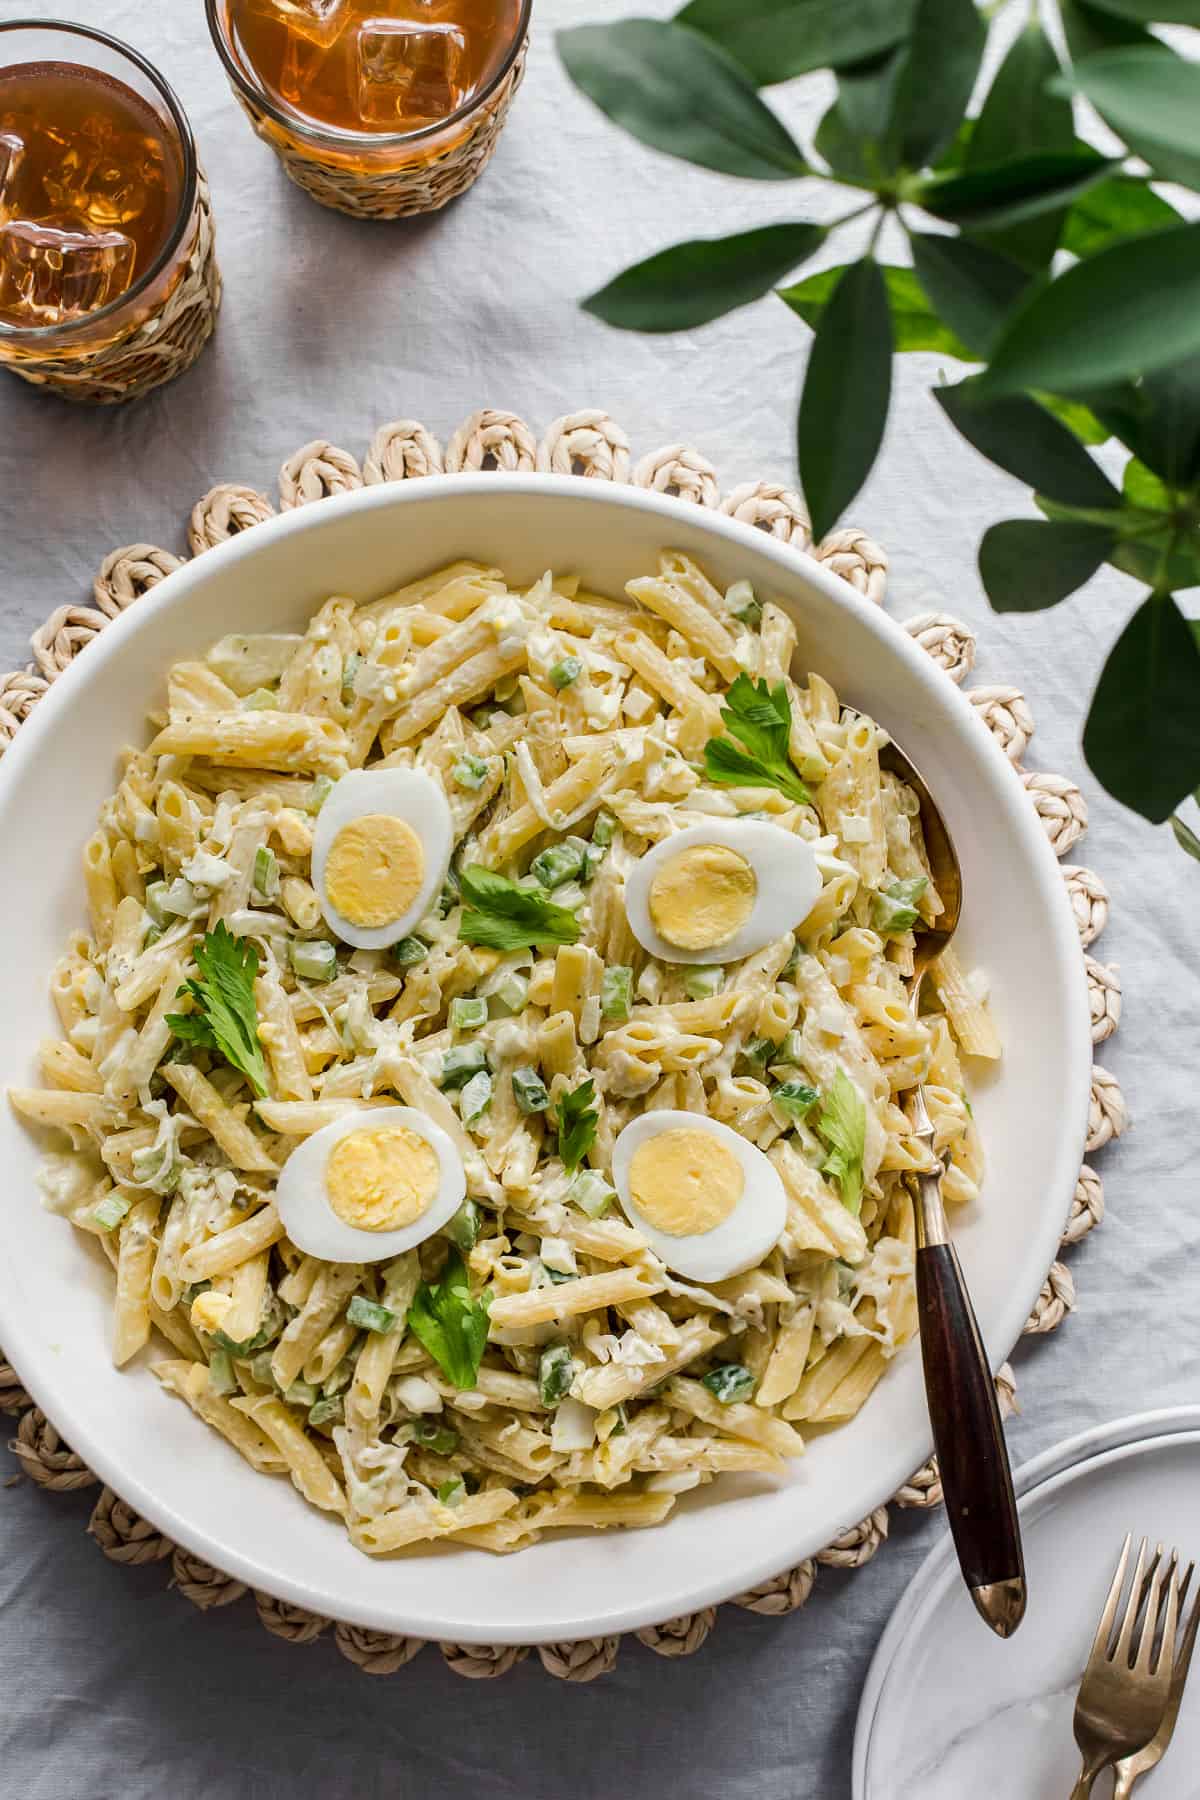 Cold Creamy Pasta Salad with Mayo